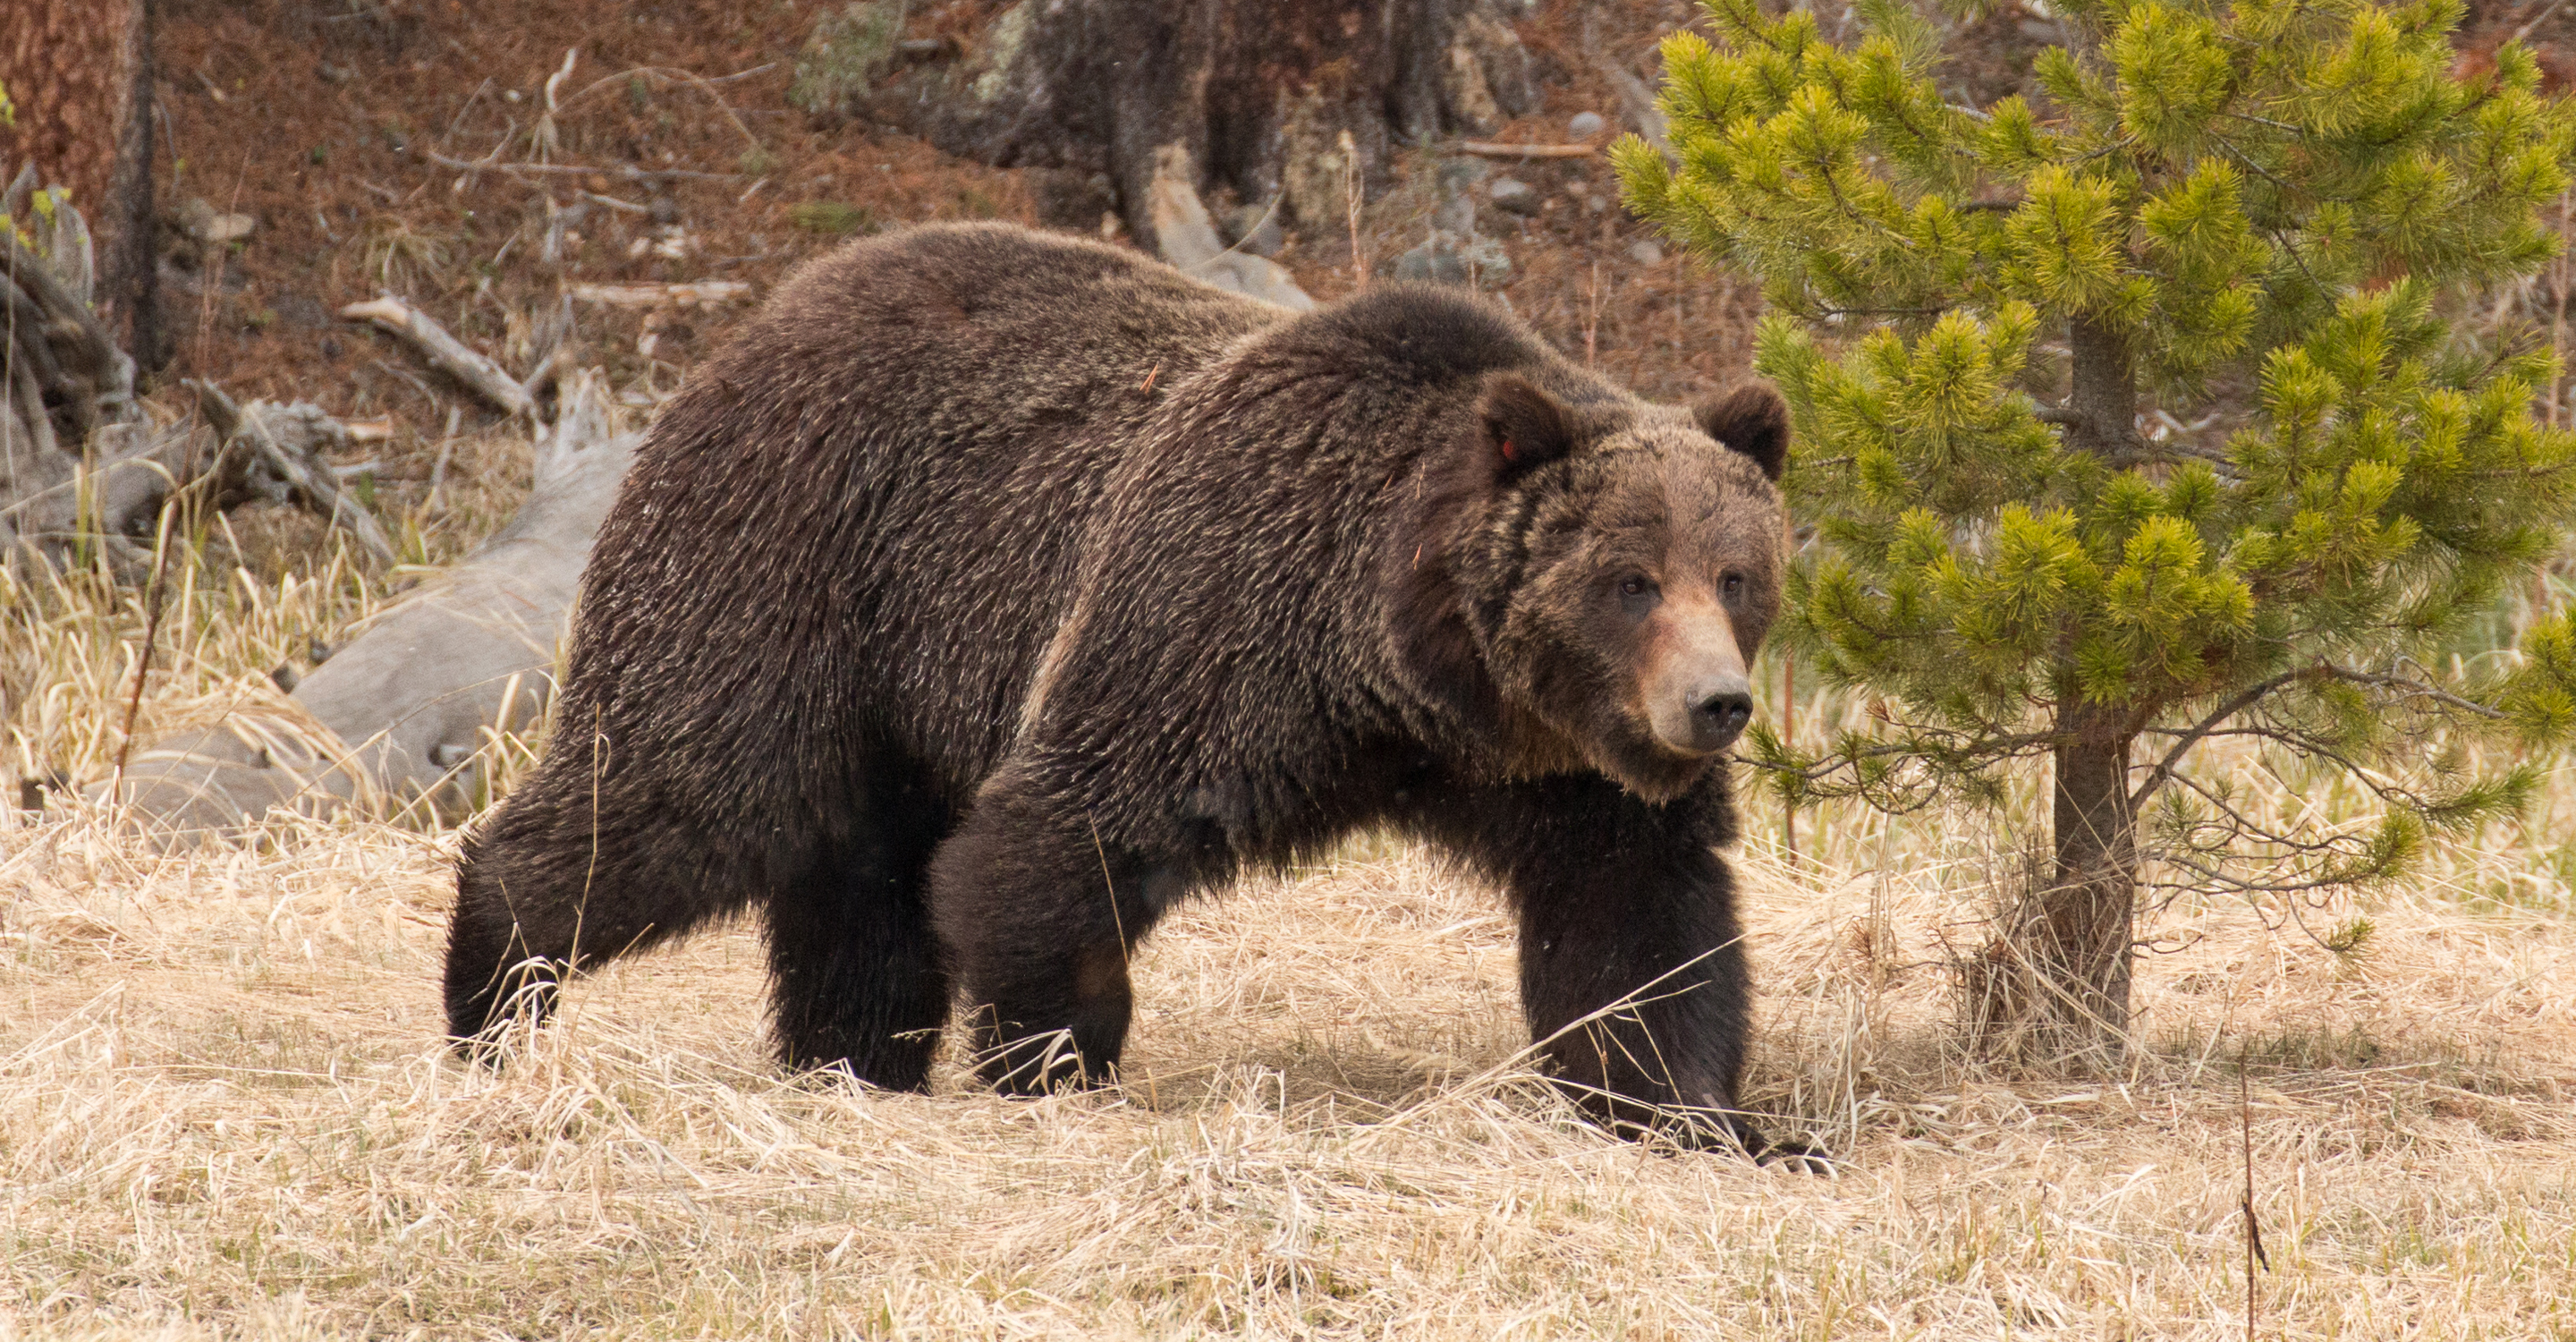 Grizzly bear walking in Yellowstone National Park, United States